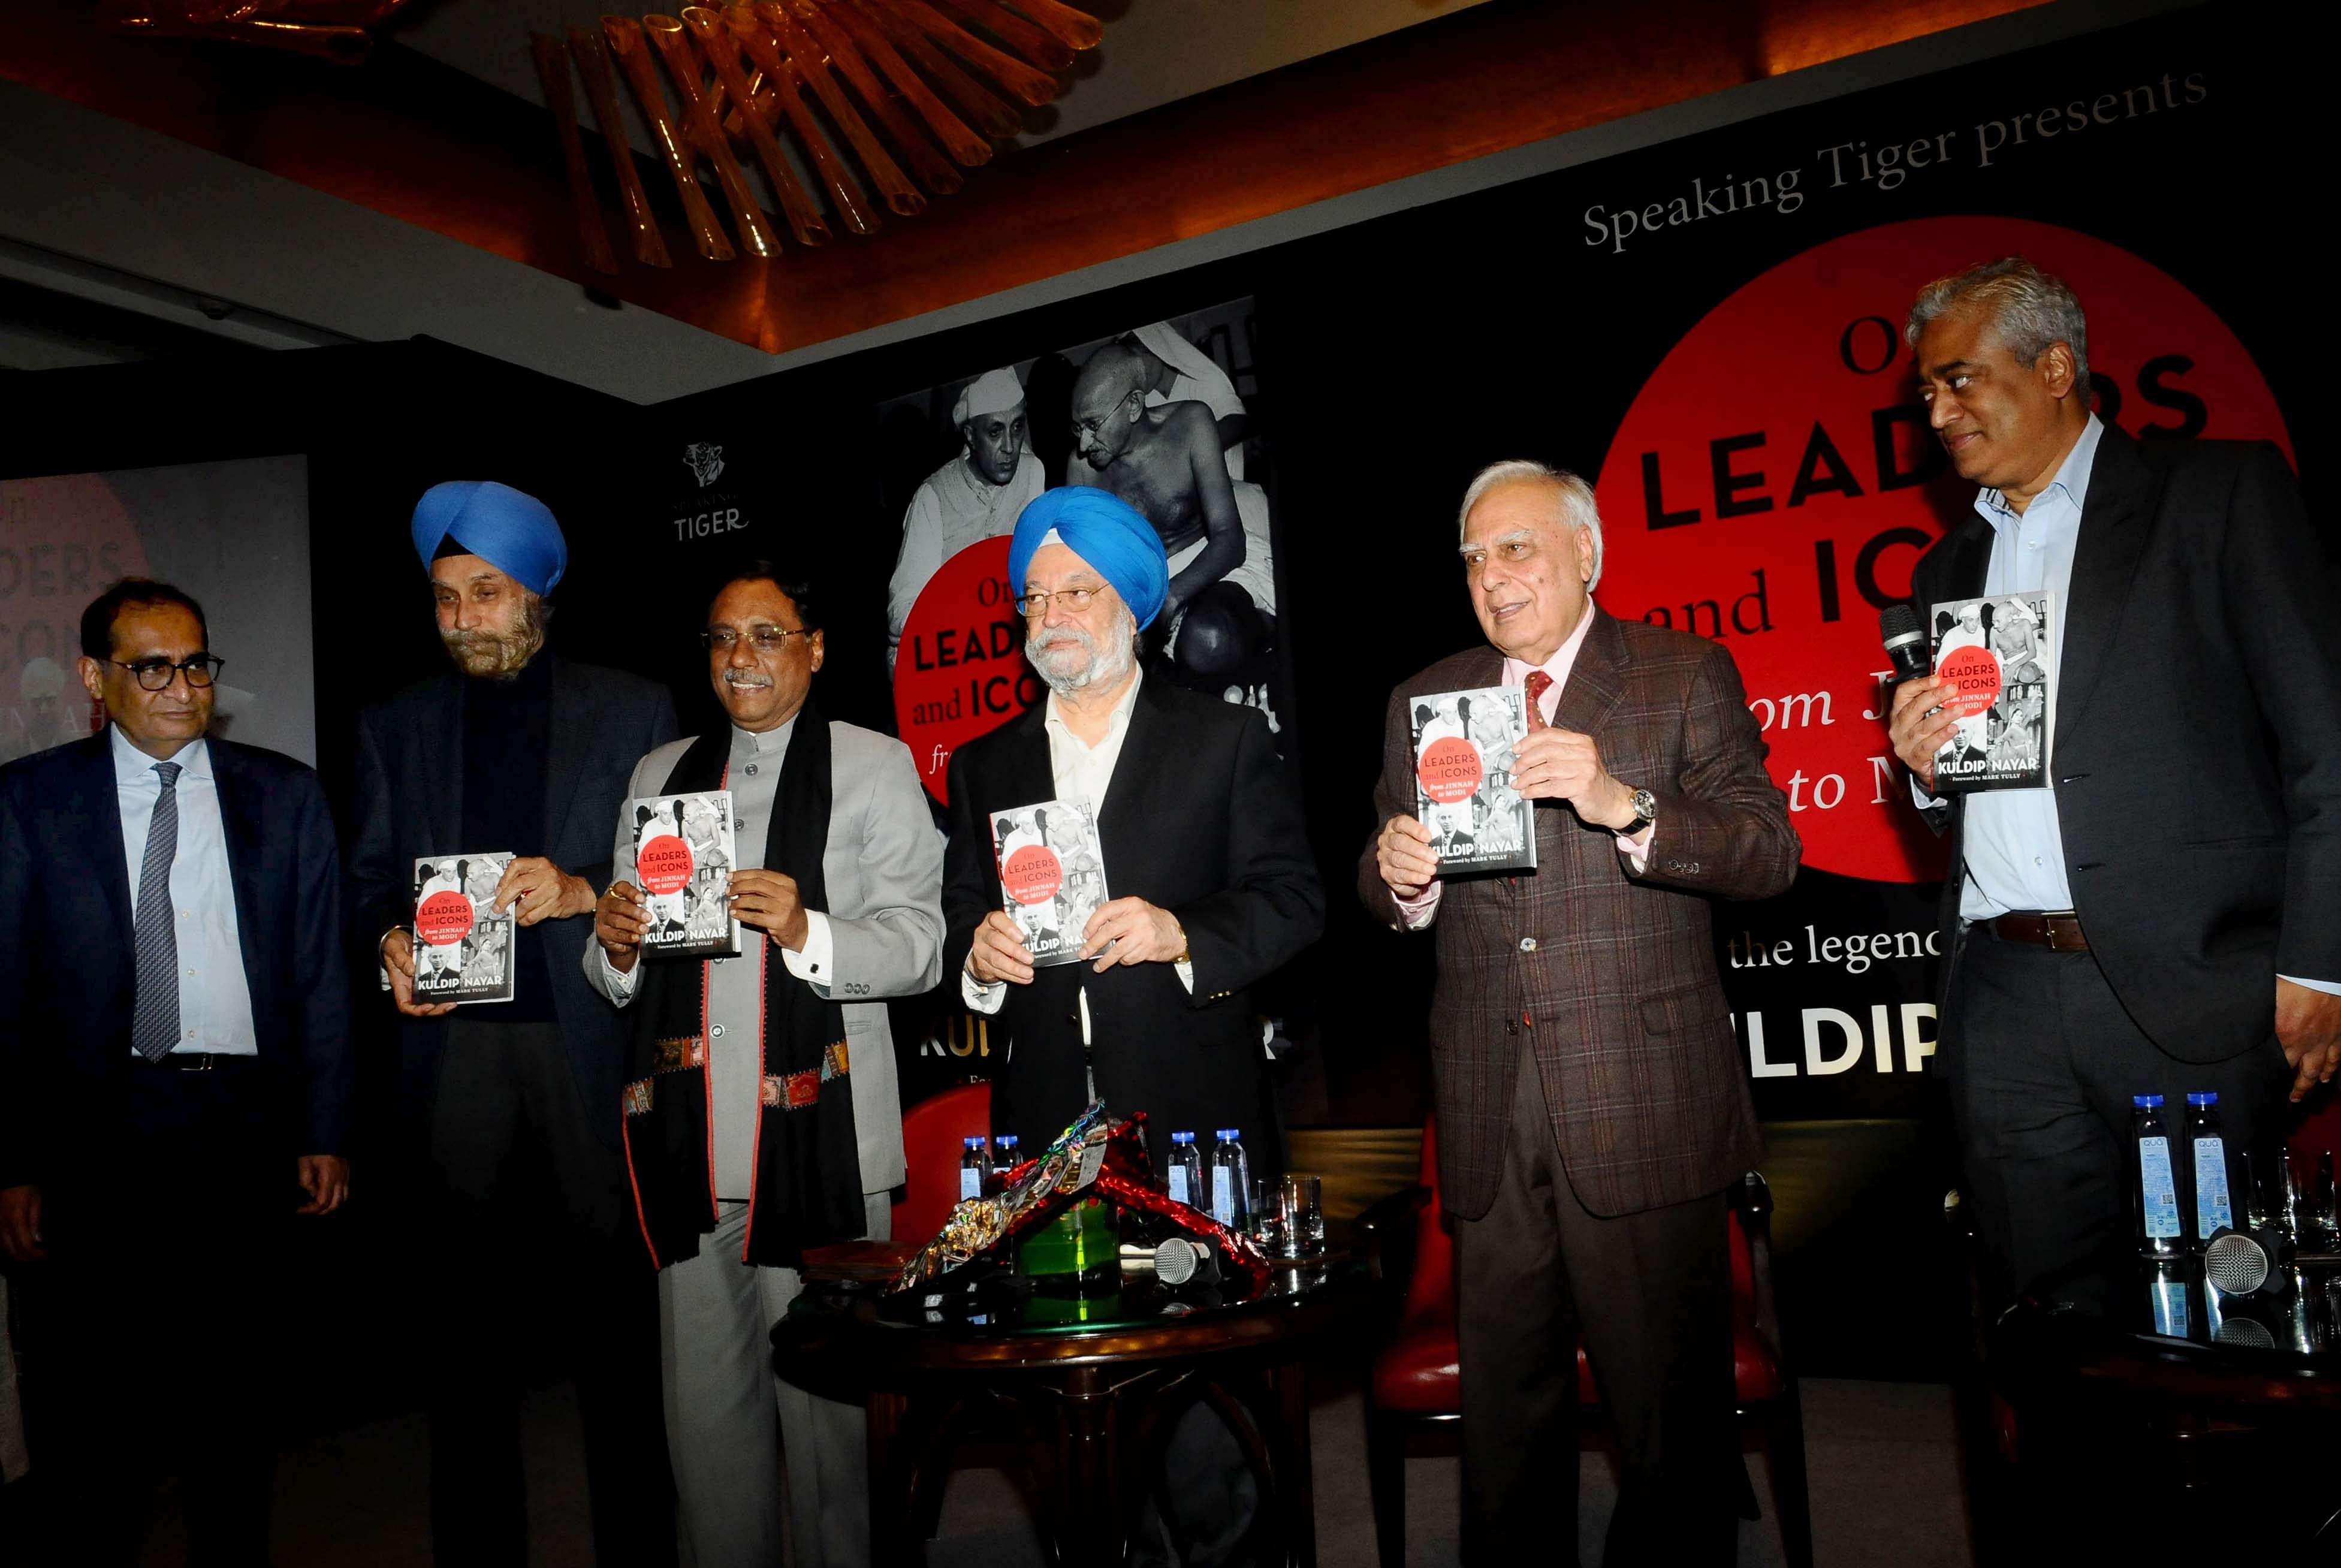 Kuldip Nayar’s last book “On Leaders and Icons: From Jinnah to Modi” released by Rajeev Nayar, Kuldip Nayar's younger son (L), Navtej Singh Sarna (2L), JDU leader Pavan K. Varma (3L), Union Minister of State with Independent Charge in the Ministry of Housing and Urban Affairs, Hardeep Singh Puri (C), Congress leader Kapil Sibal (2R) and journalist Rajdeep Sardesai (R) at Oberoi Hotel in New Delhi, India, on Friday, February 8, 2019. DH Photo